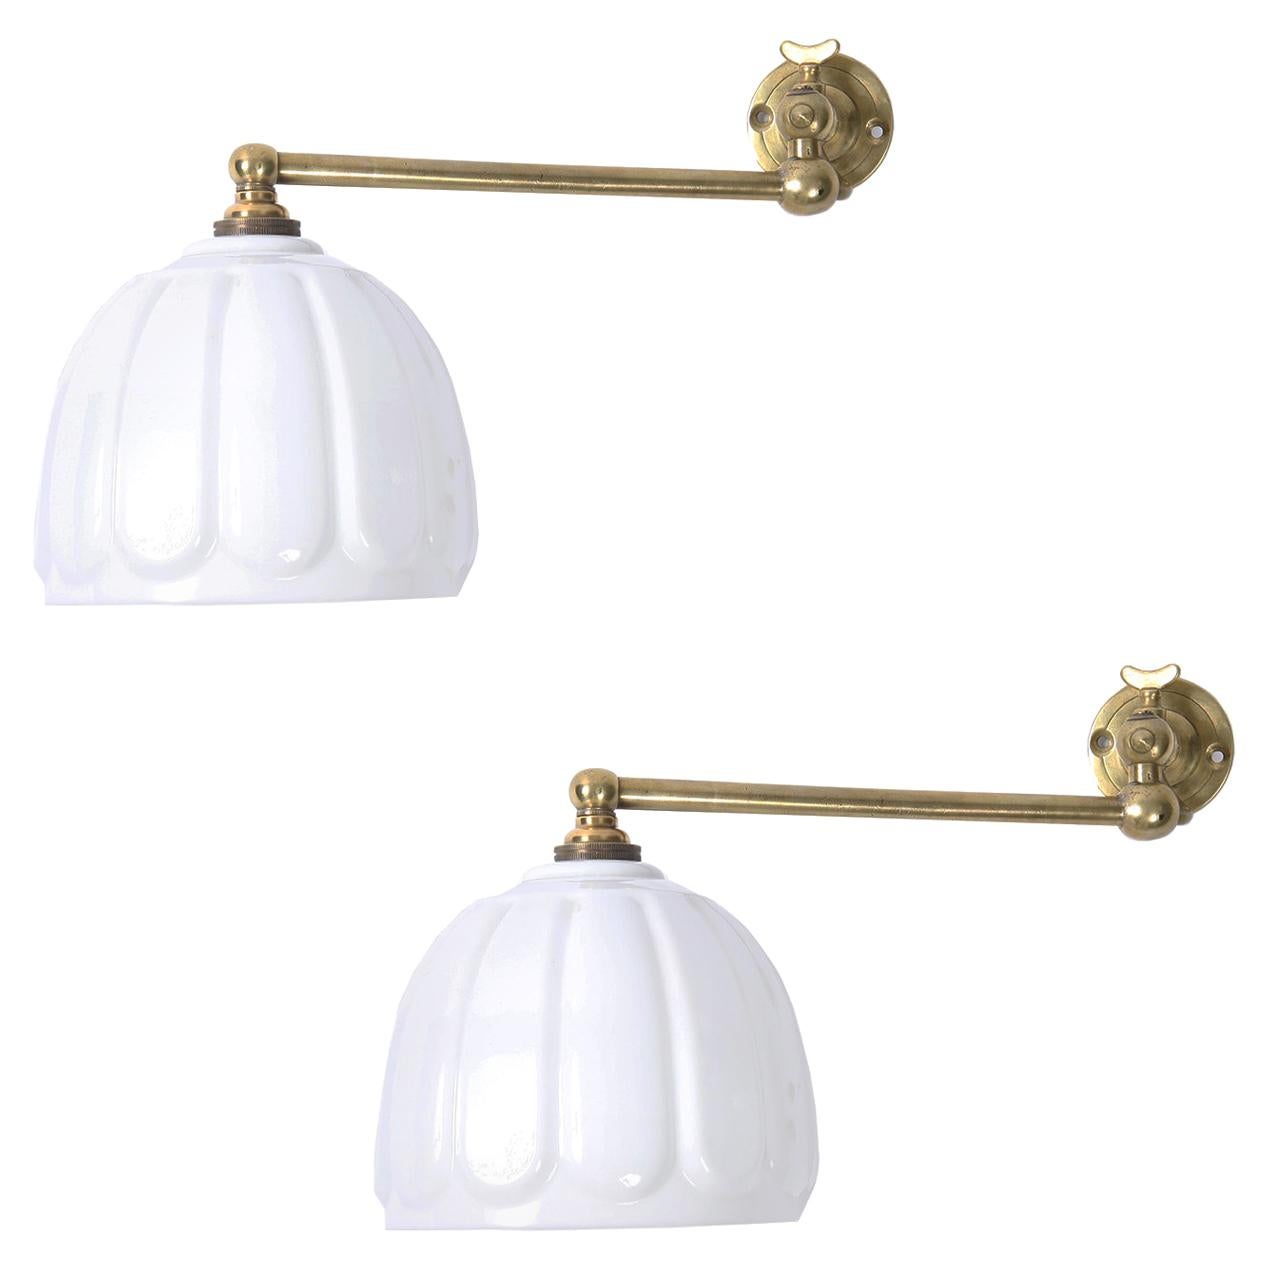 Pair of Brass Wall Lights with Opaline Shades